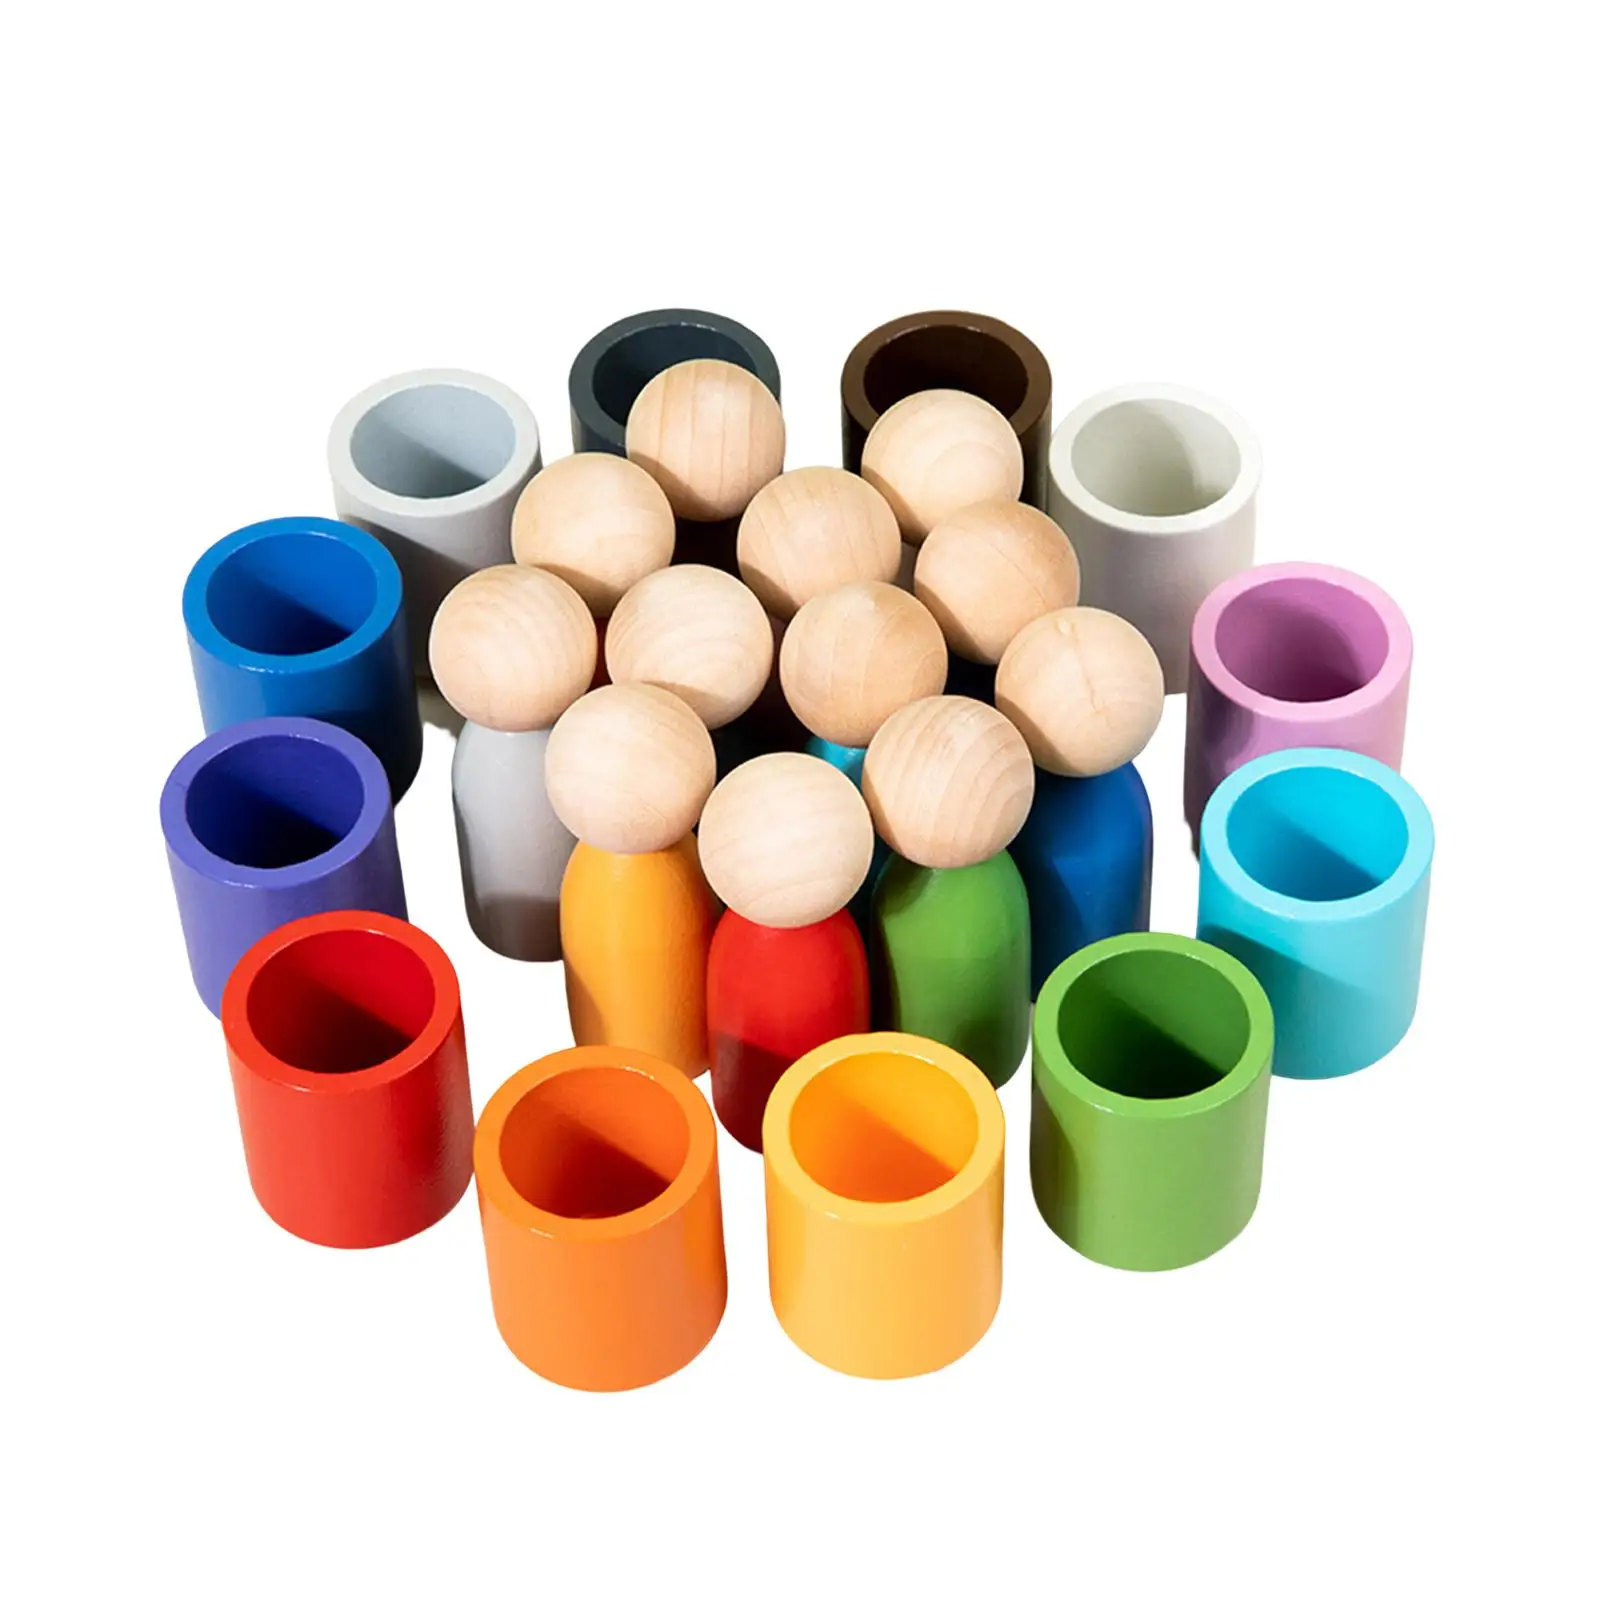 Wooden Peg Dolls in Cups Color Sorting Peg Dolls for Toddlers